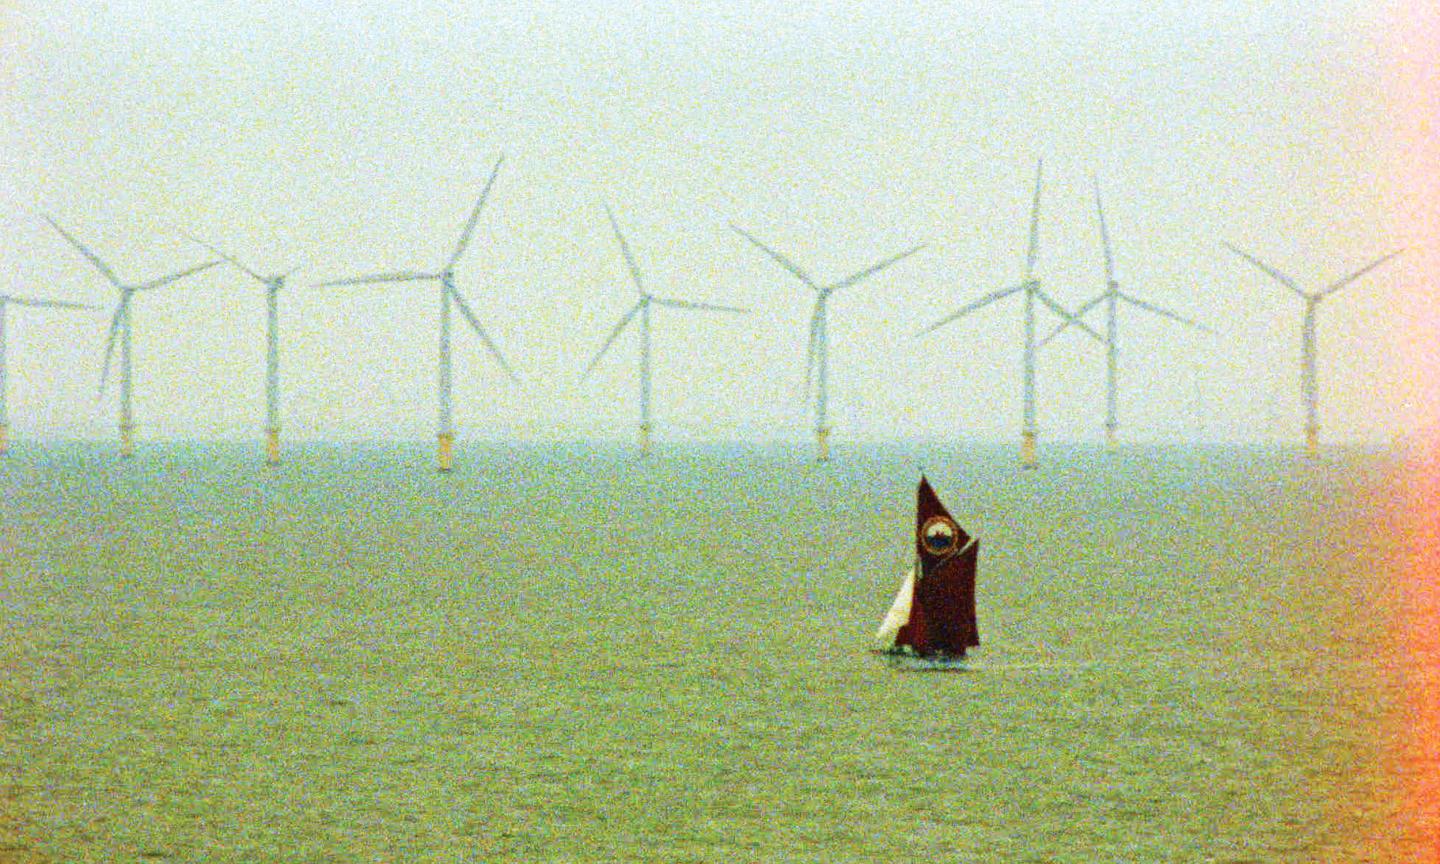 sailing vessel with sails up seen in foreground, with a sea of wind turbines behind.